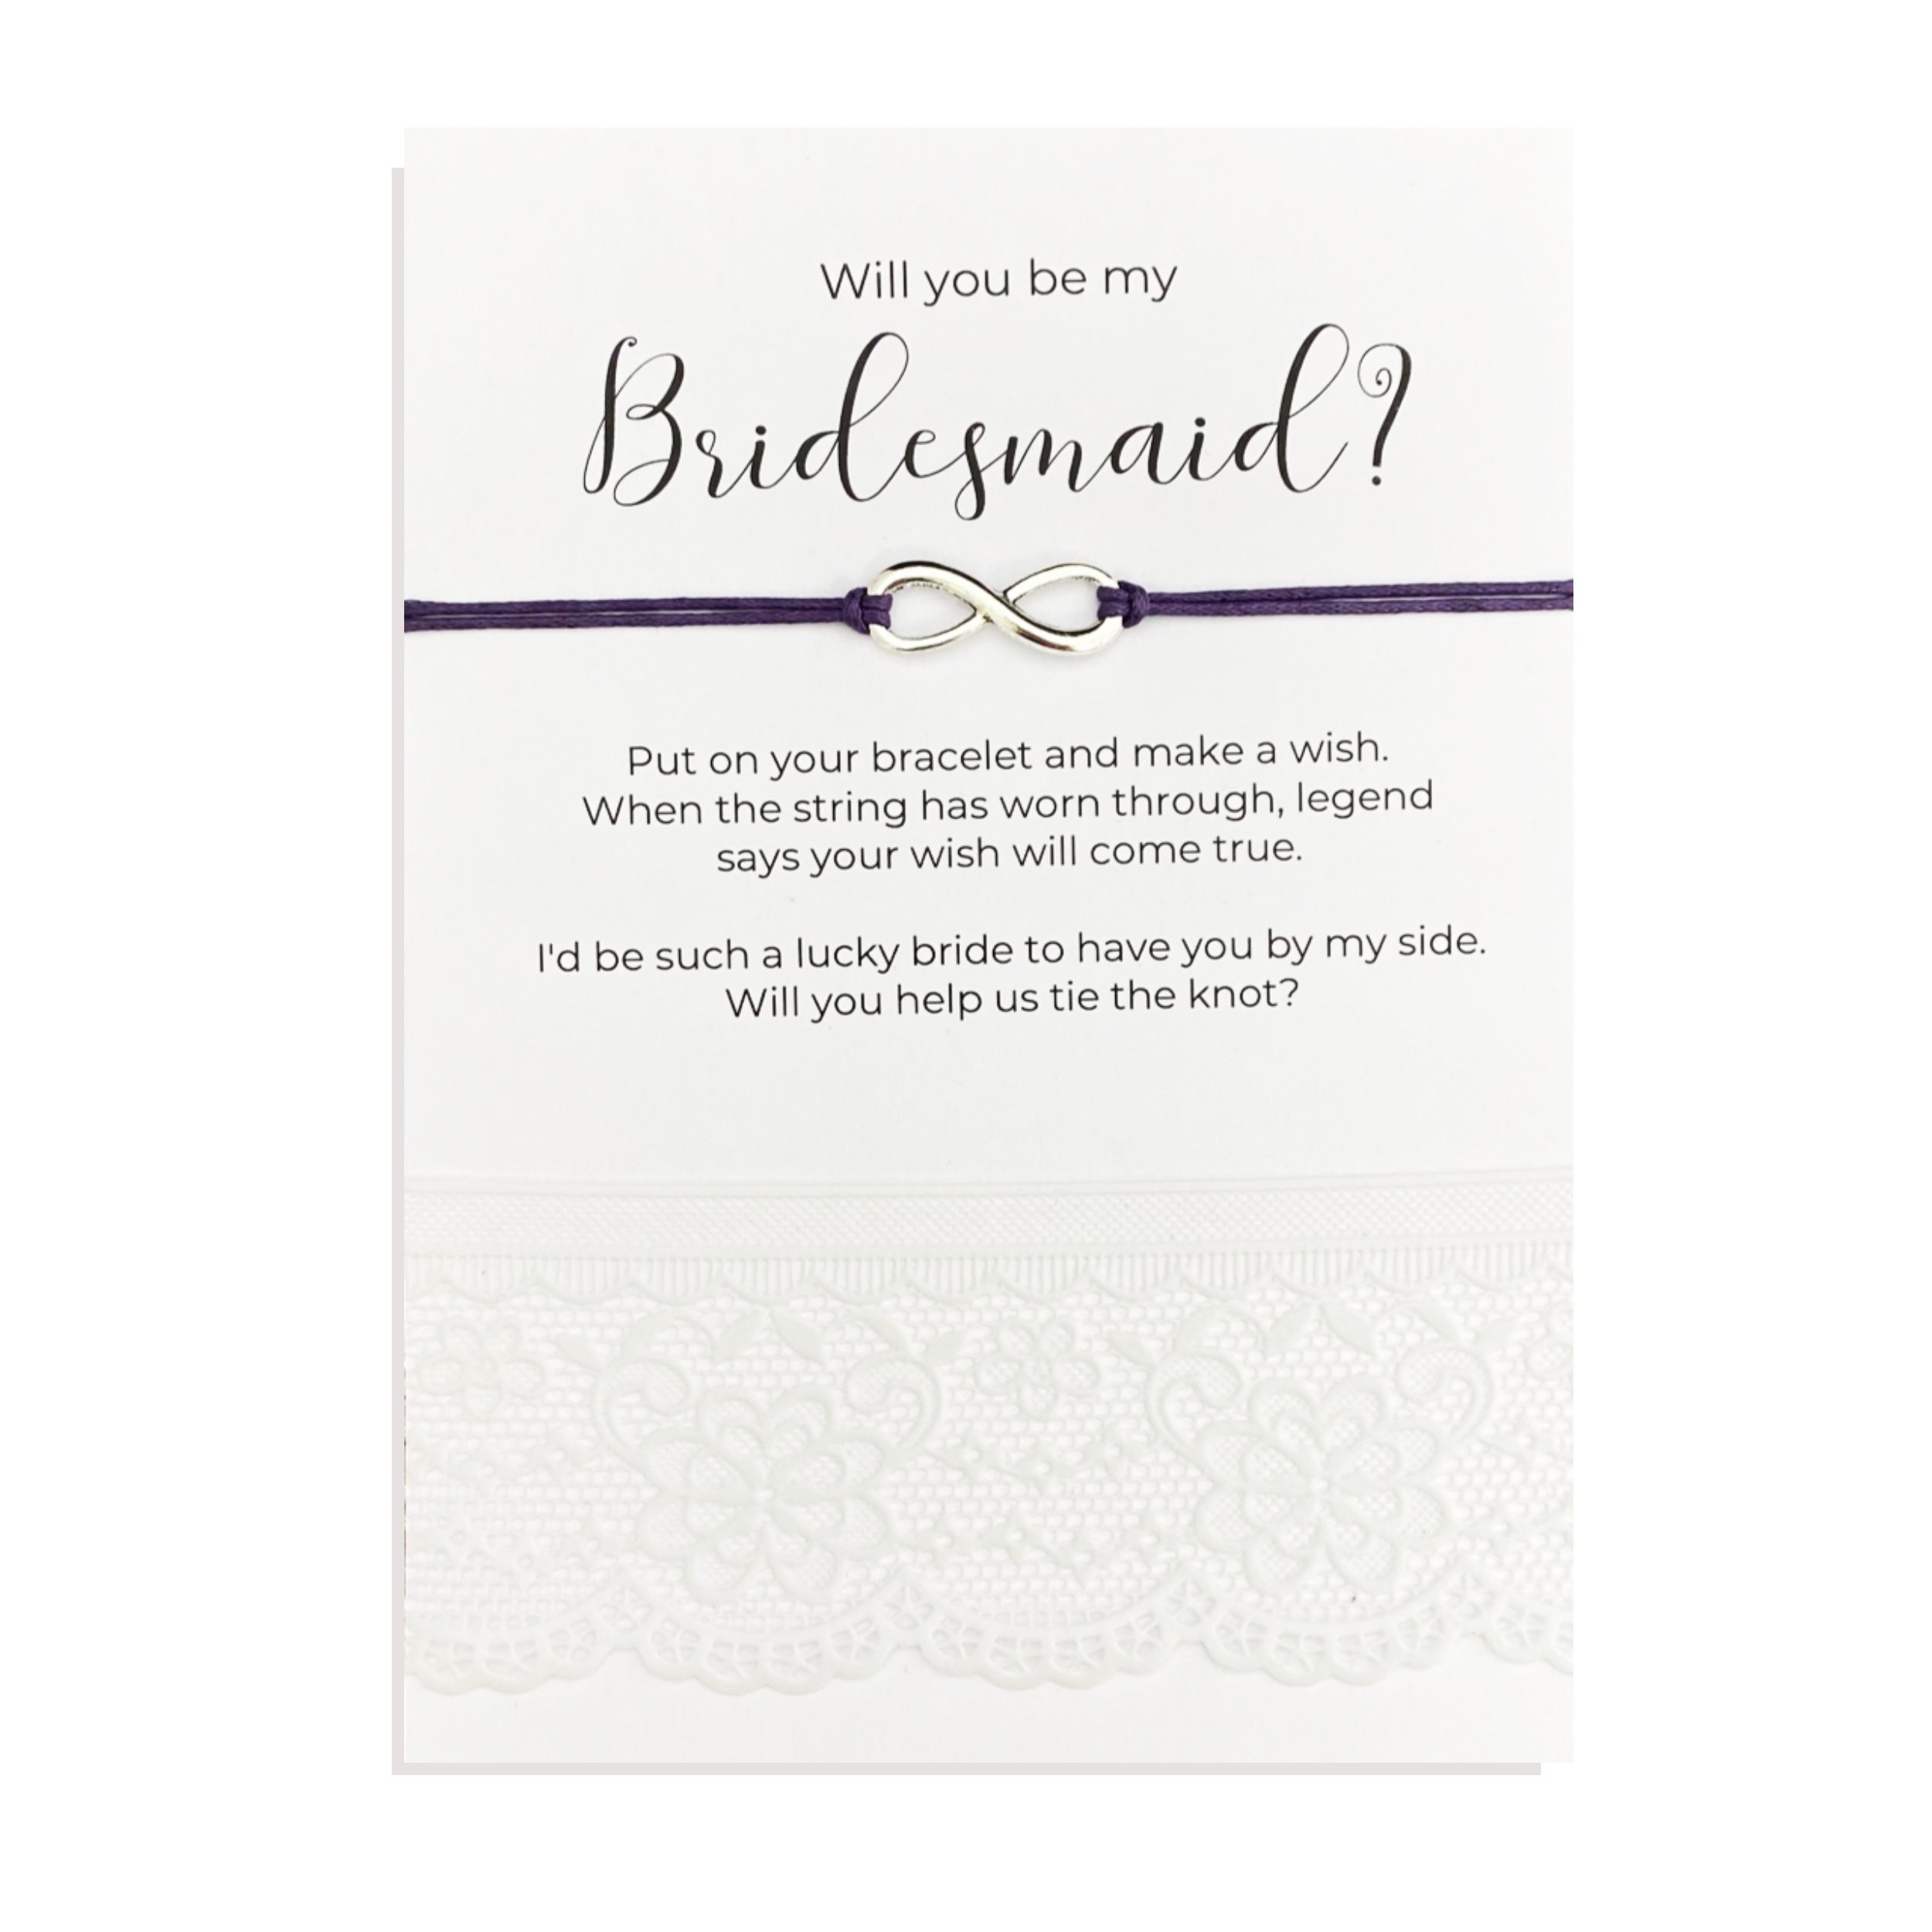 Maid of honor gift Will you be my bridesmaid gift B3 Bridesmaid invitations Bridesmaid gift ideas Ask your bridesmaids Bridesmaid bracelet